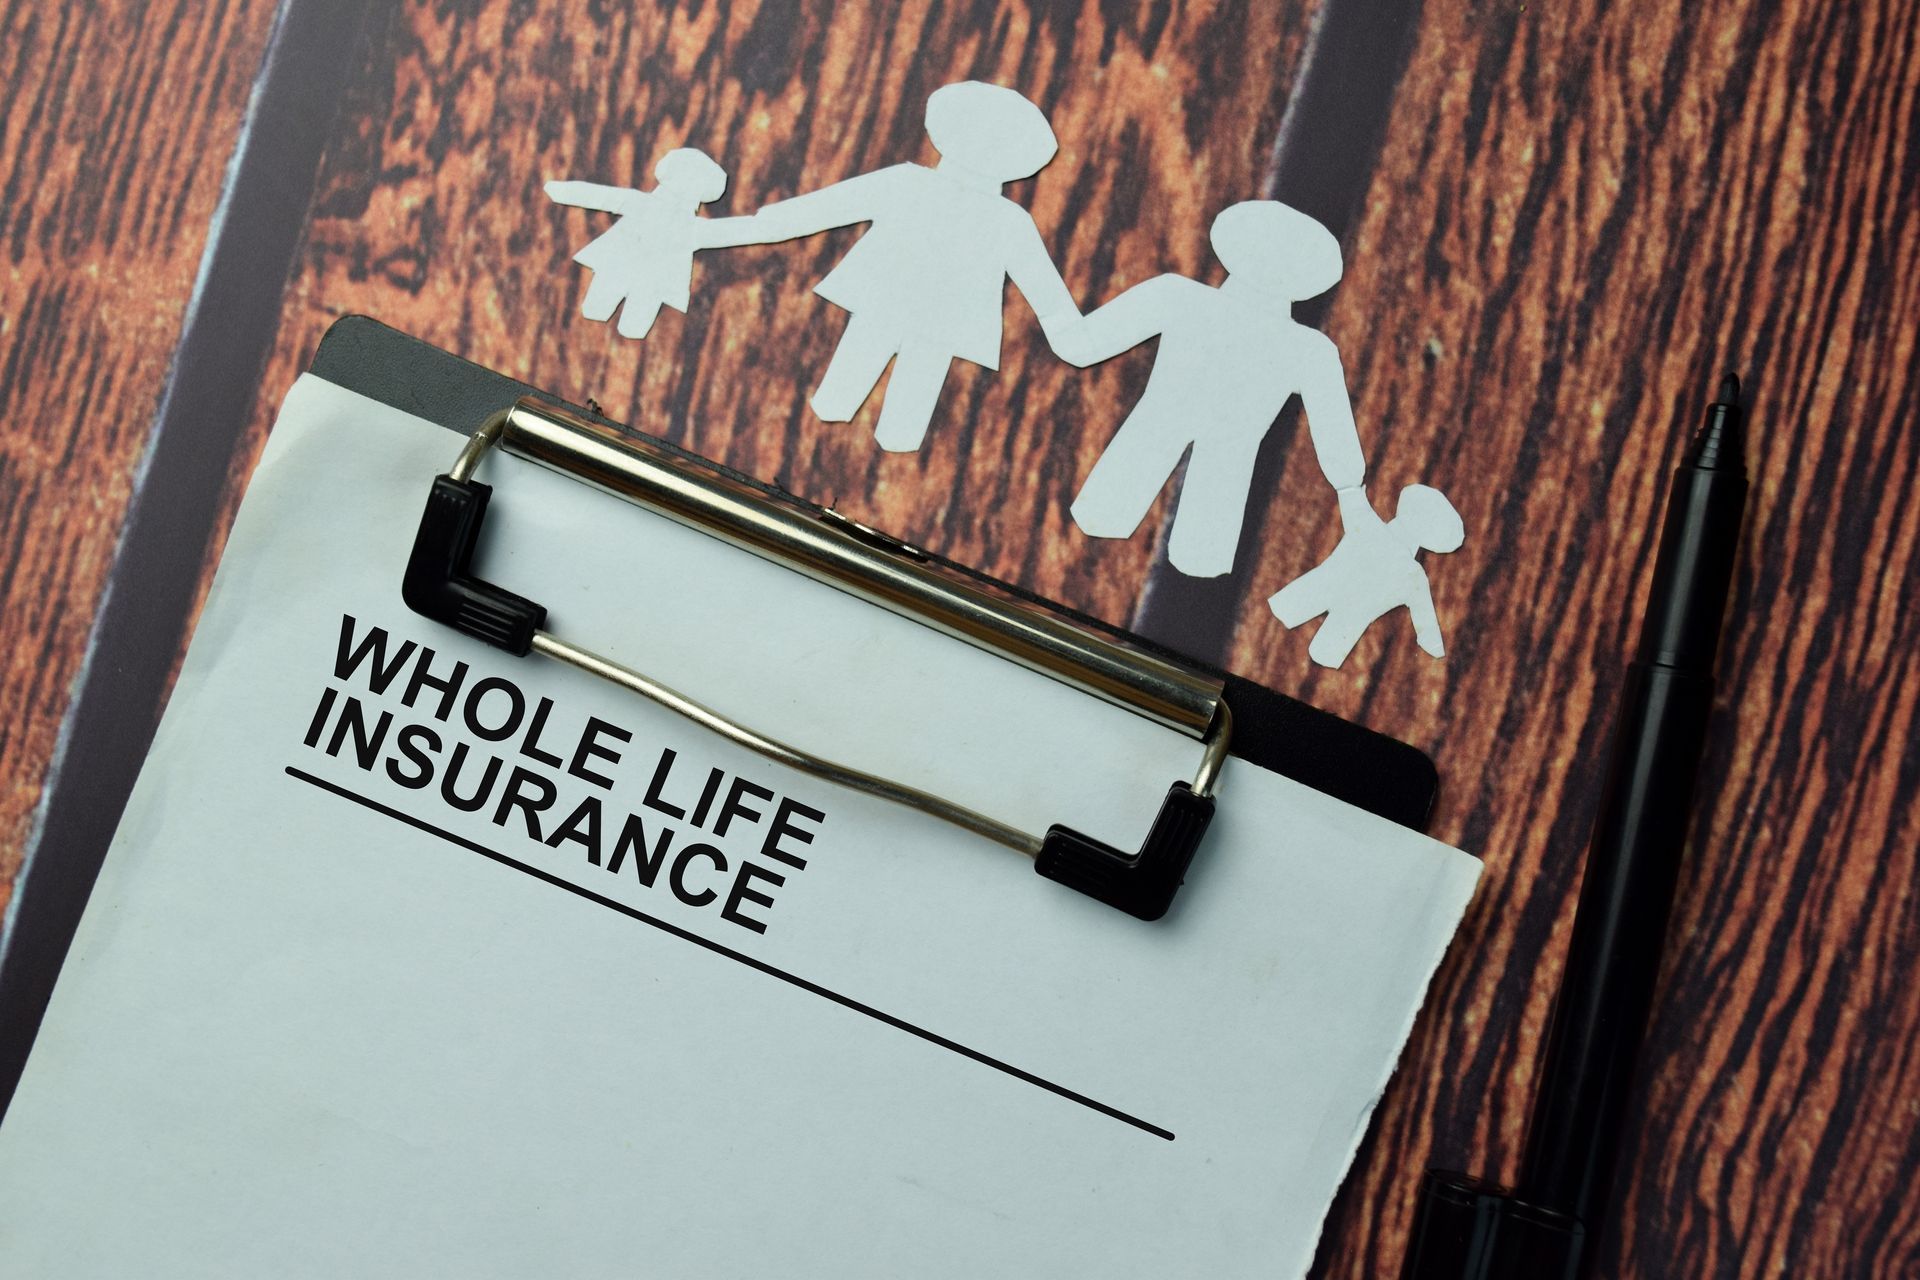 A clipboard with a whole life insurance form on it.